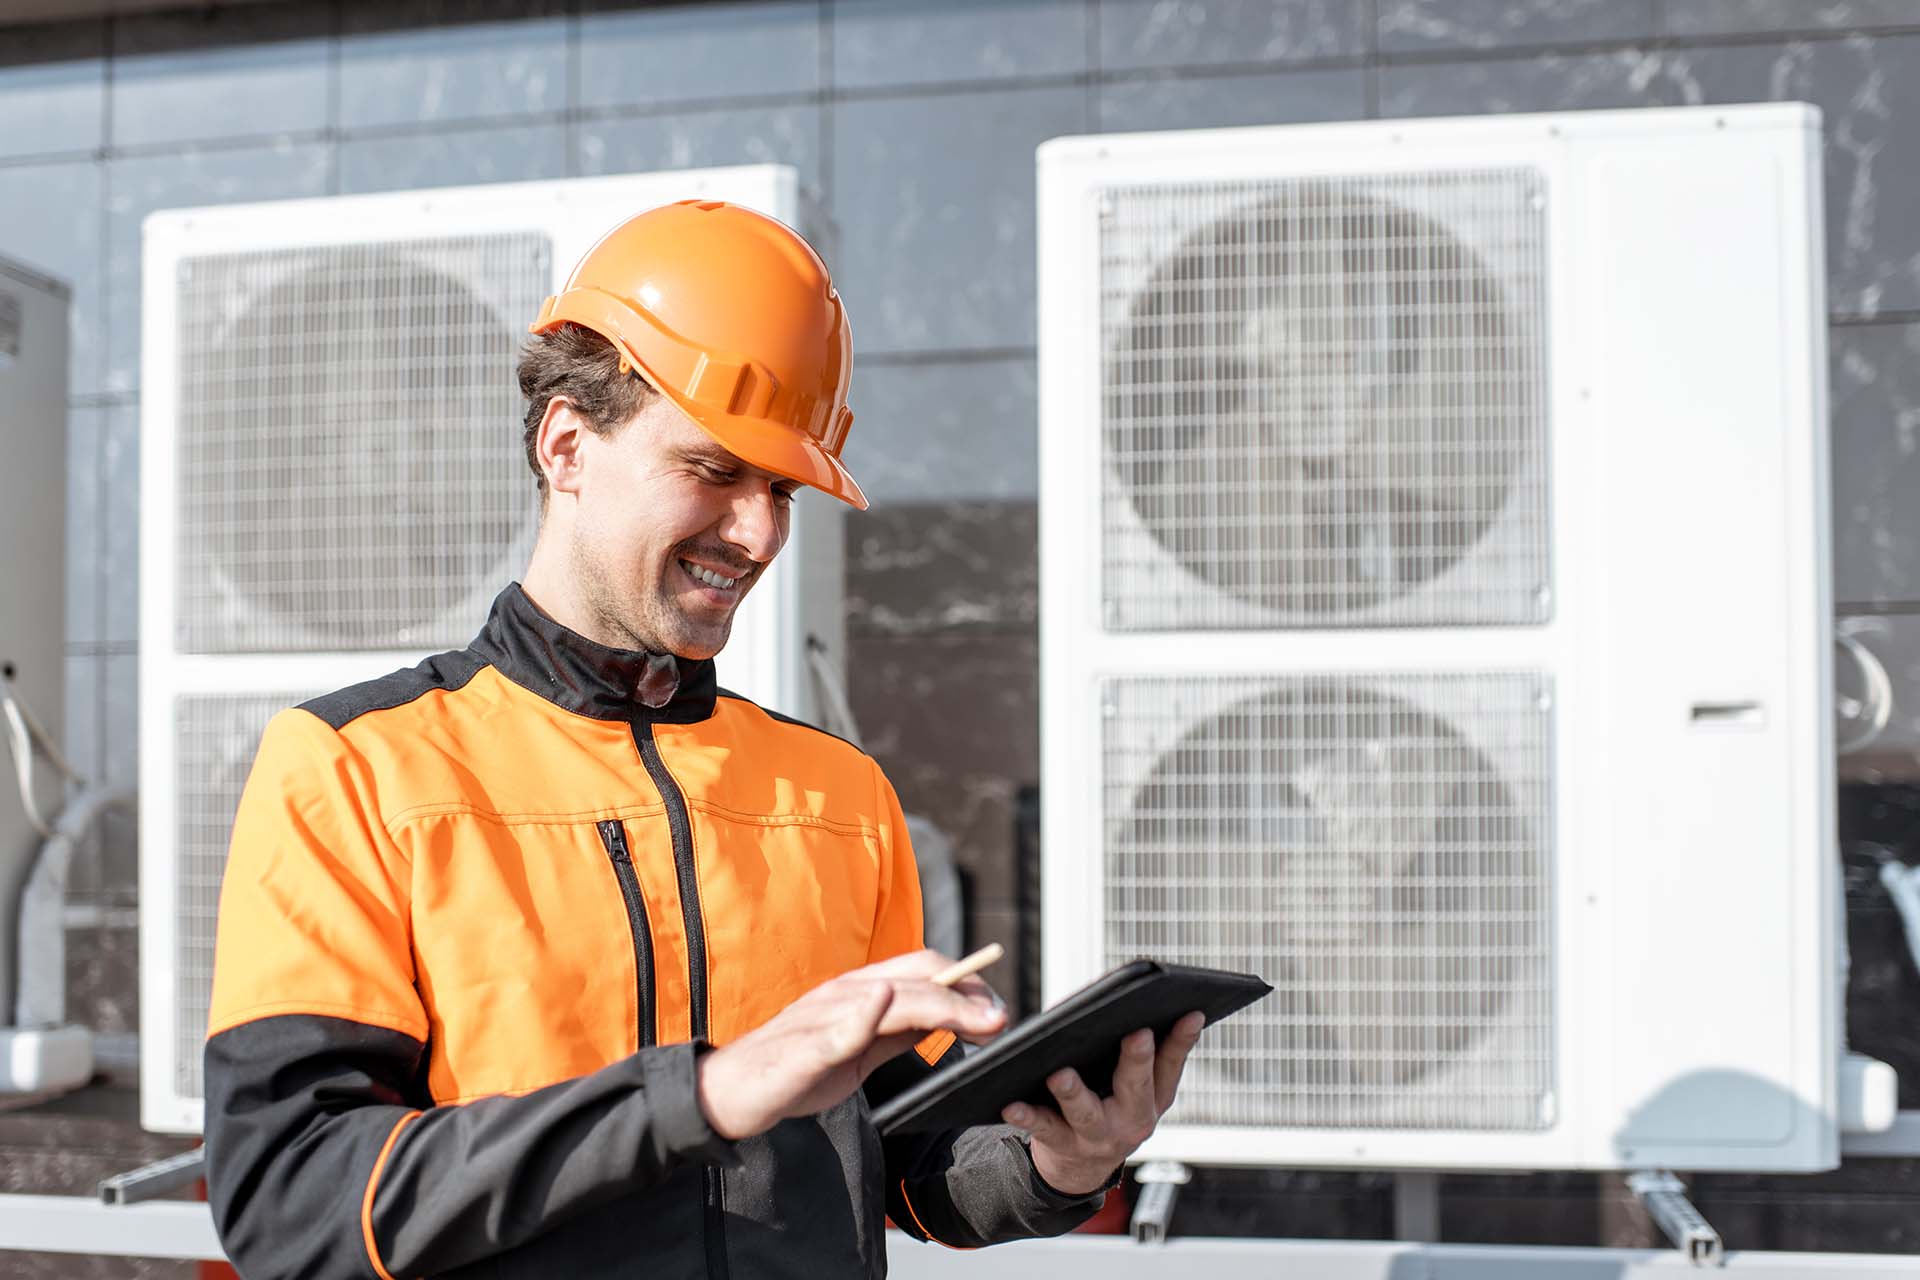 A helmeted man using a tablet in the foreground of ventilation equipment